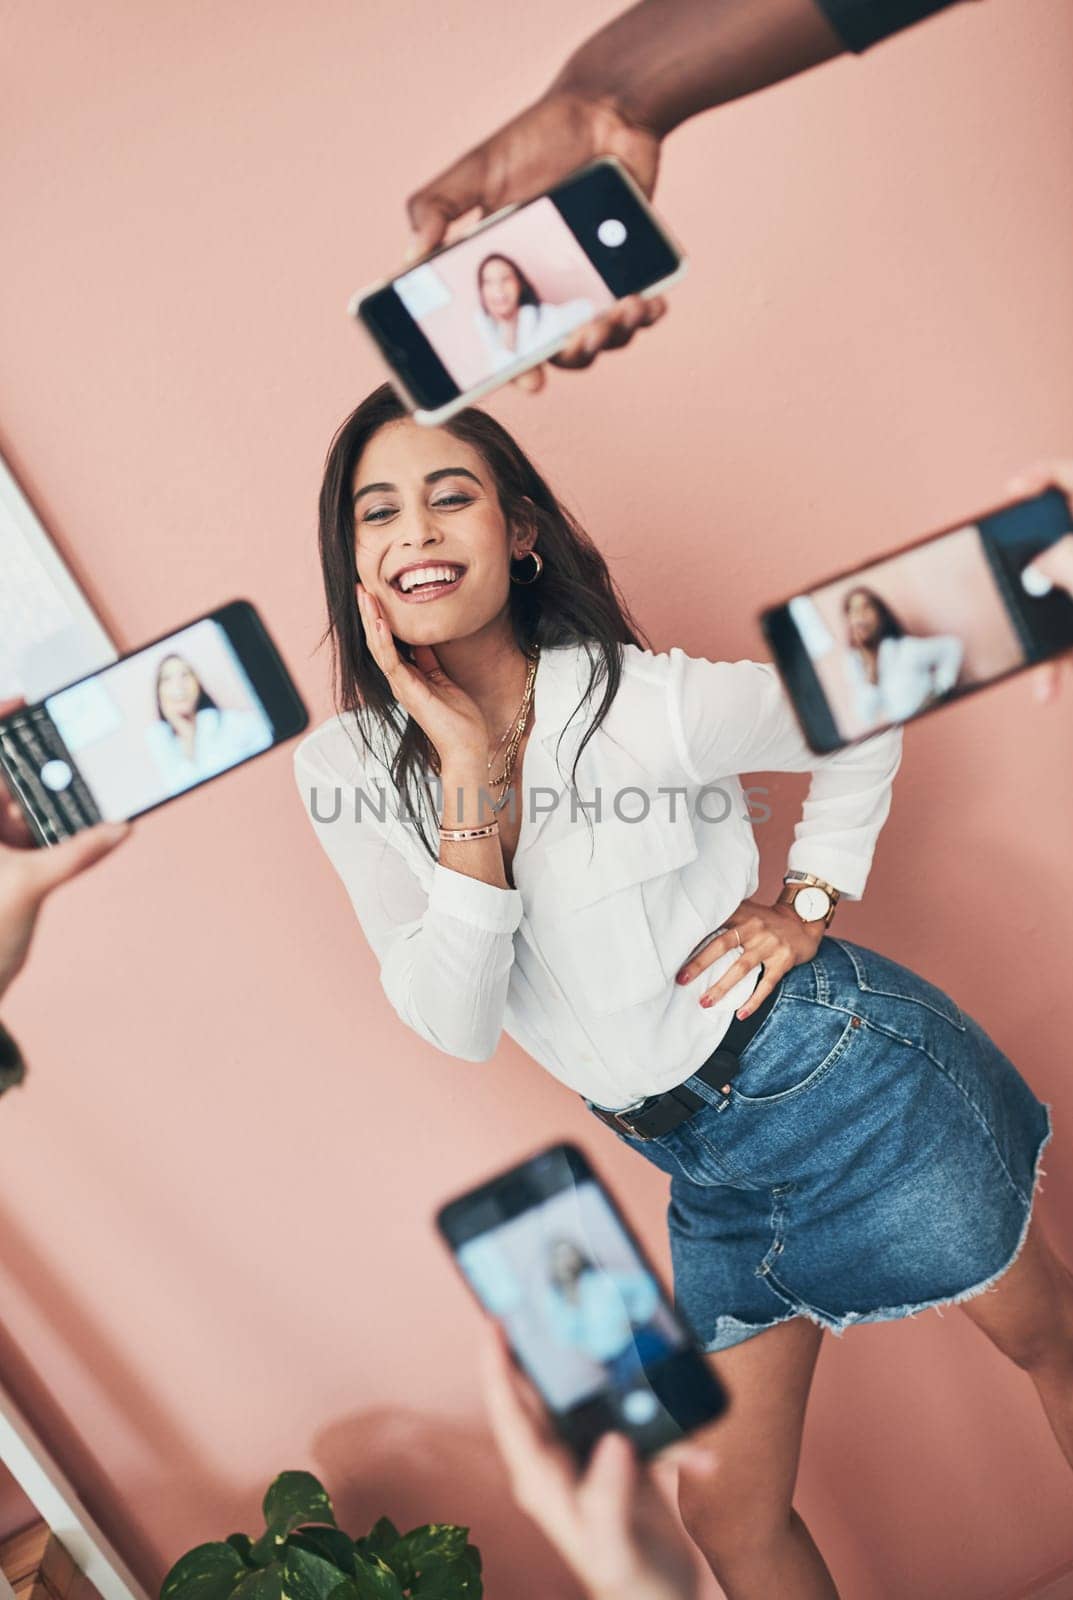 Everyone wants to know her secret. a beautiful young woman having her picture taken on multiple phones